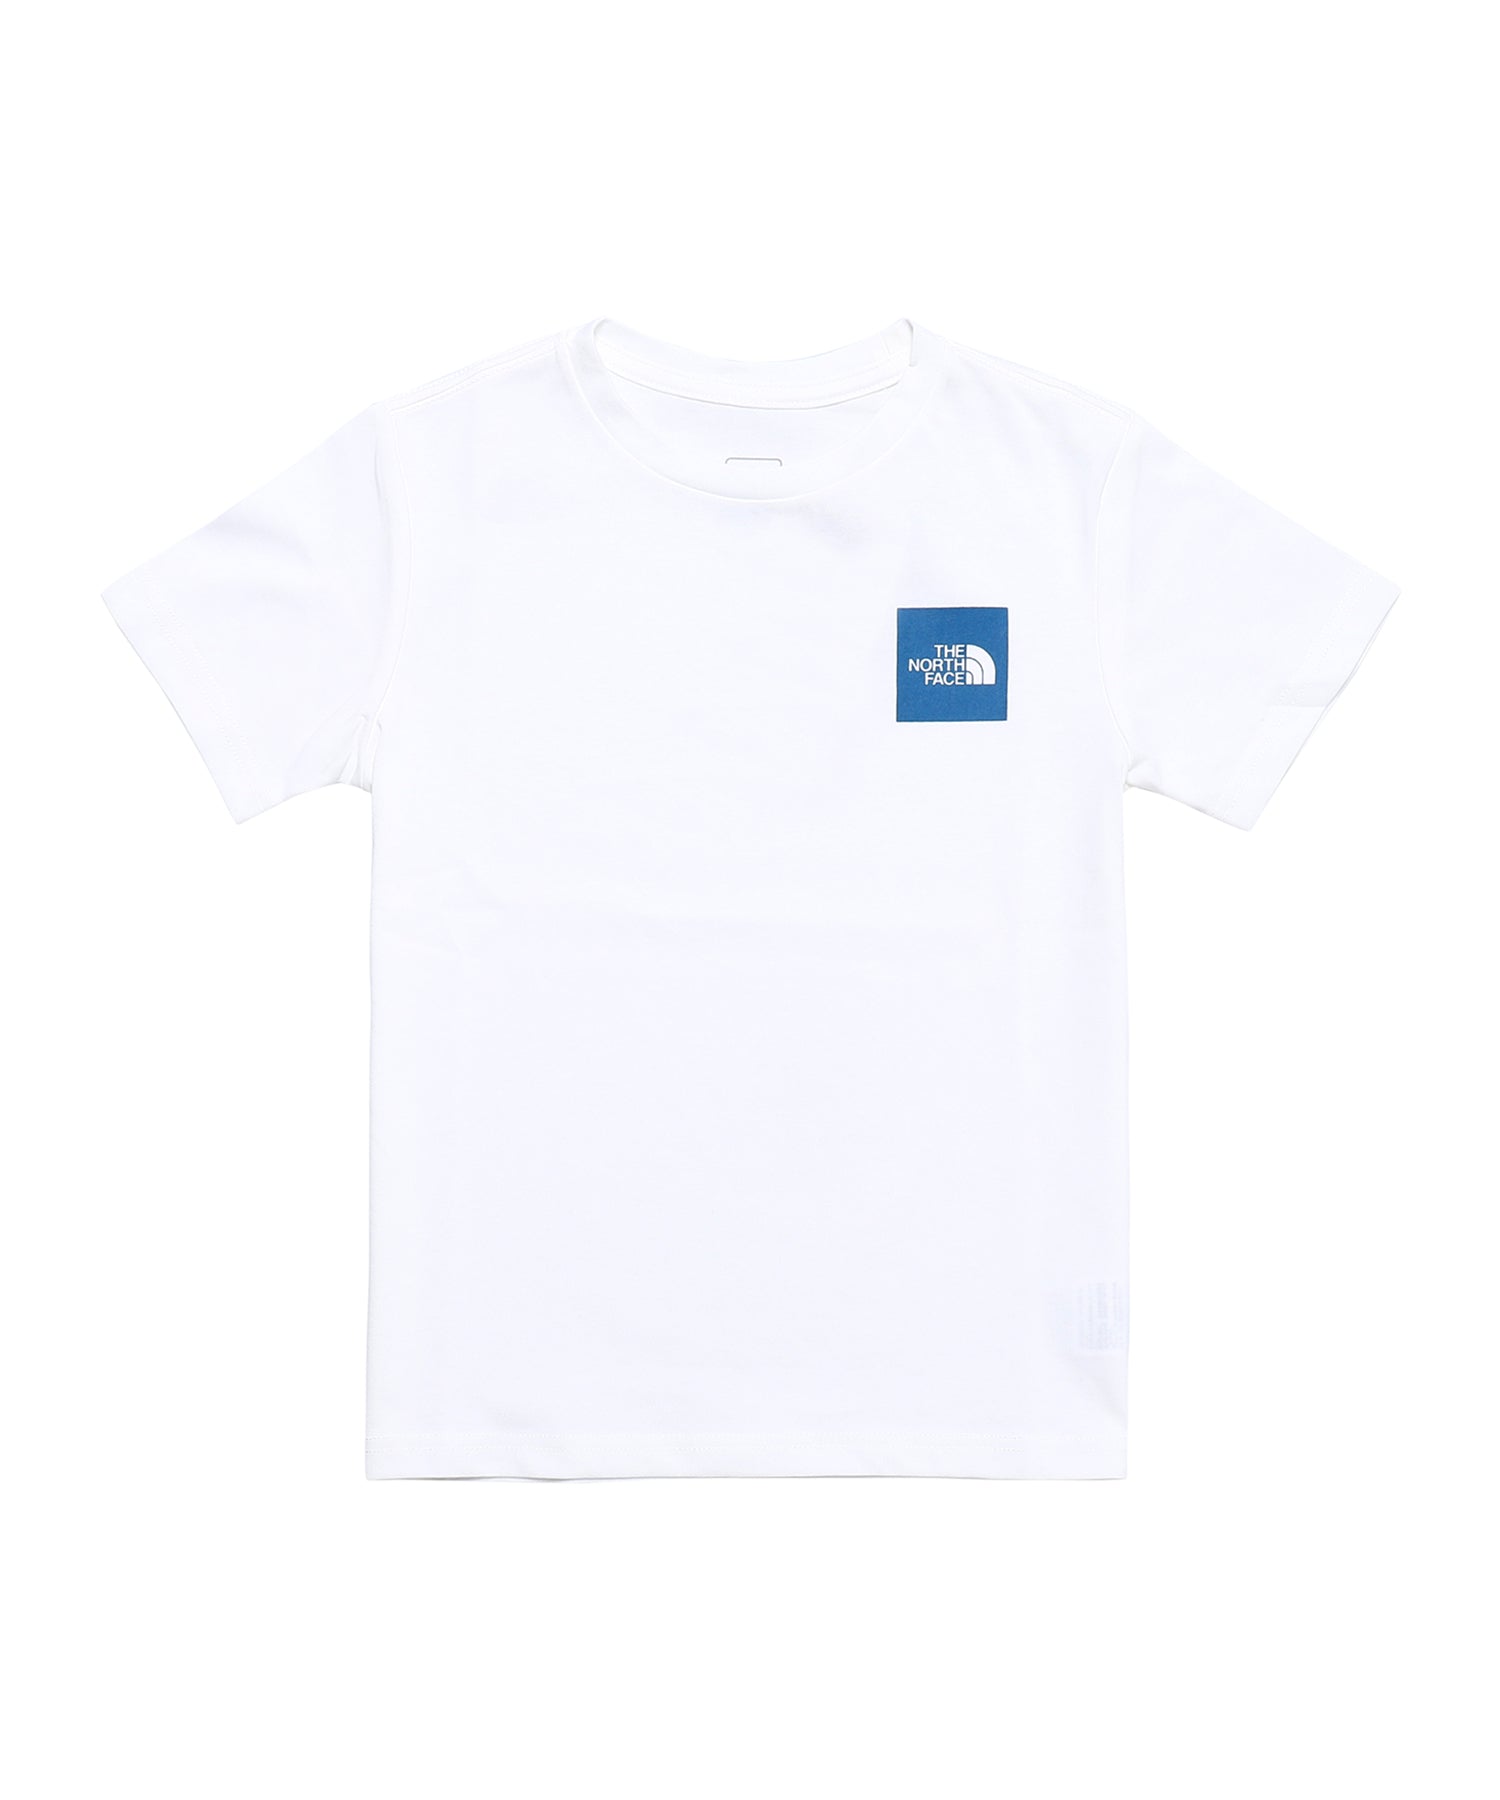 S/S Small Square Logo Tee